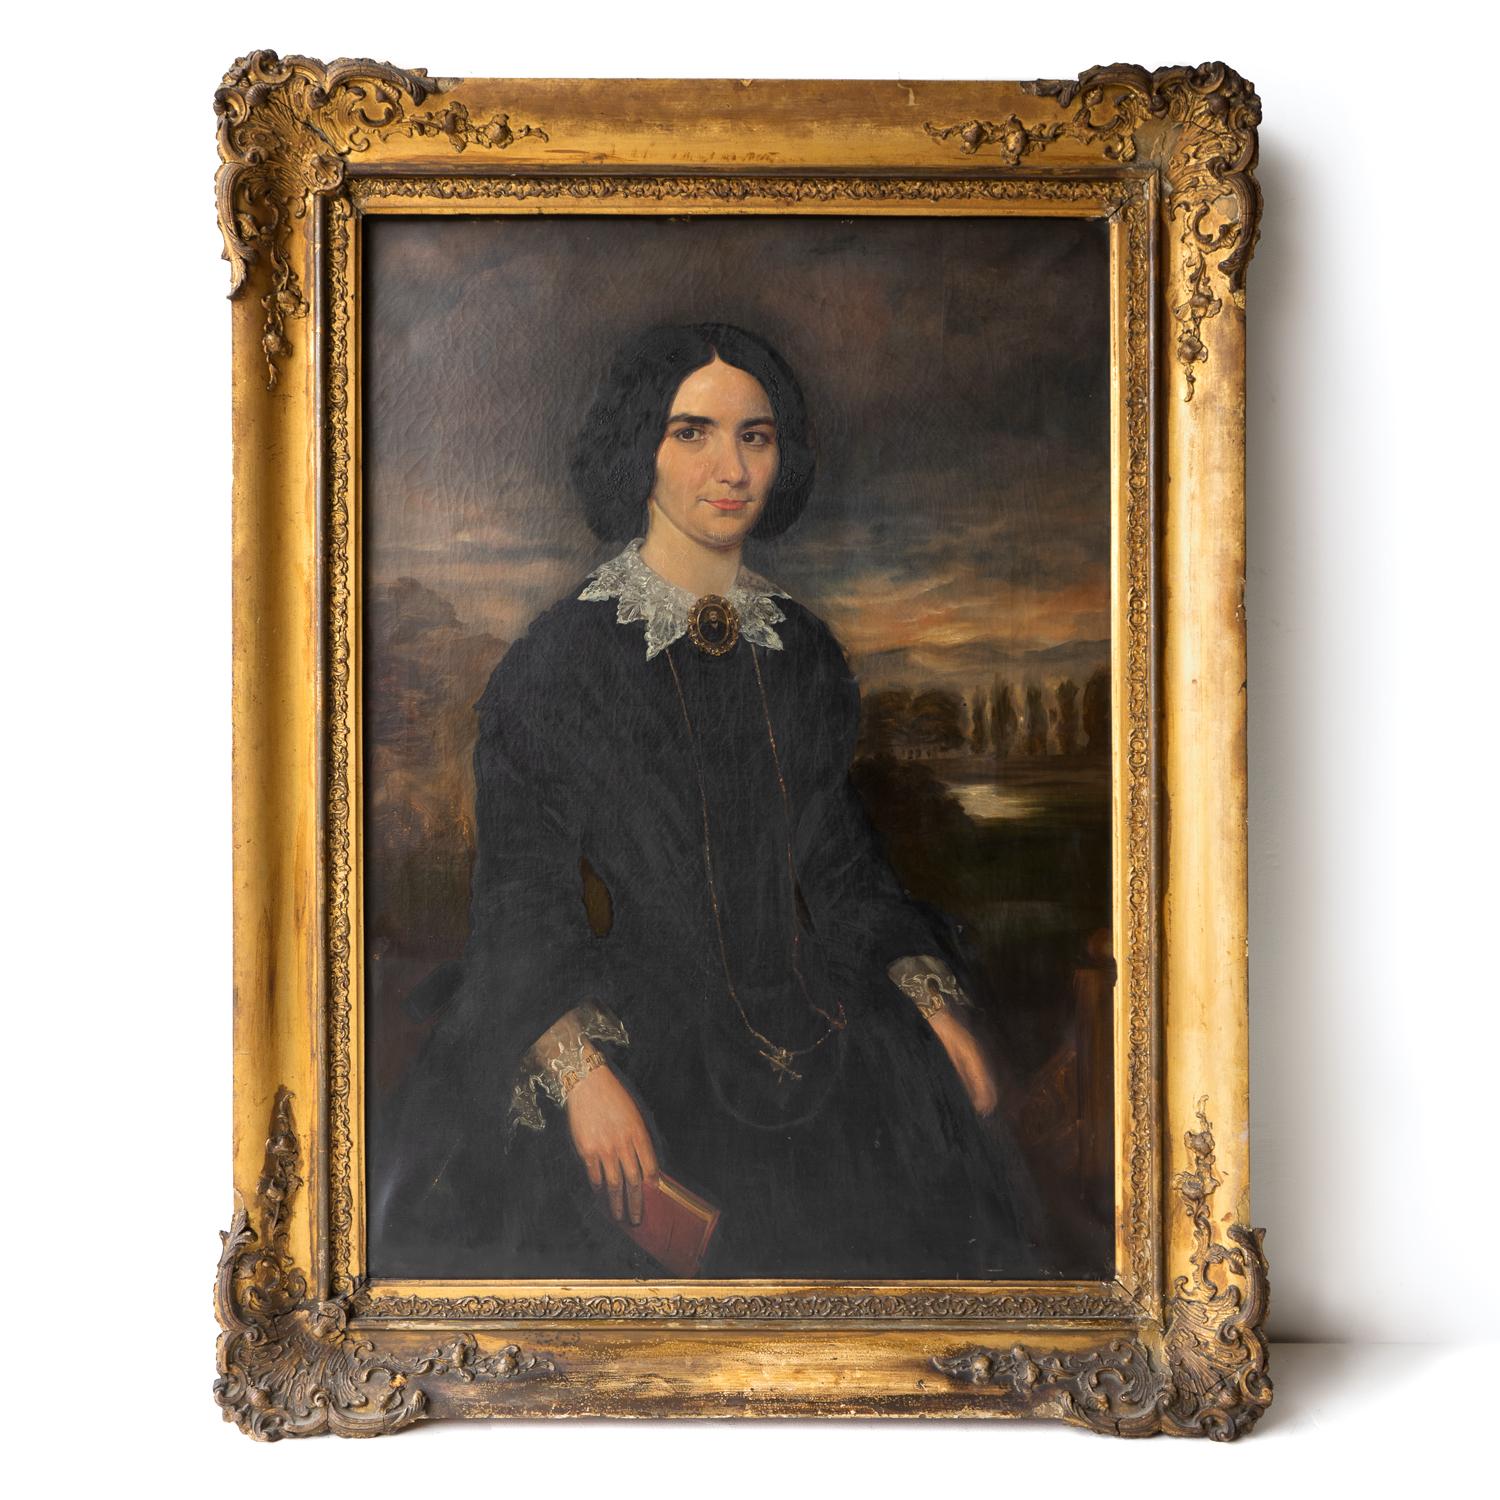 Large Victorian Portrait Of A West Country Woman In A Dramatic Landscape, Antique Original Oil On Canvas Painting, 19th Century

Depicting a confident and strong yet friendly and somewhat approachable-looking woman. She is dressed in a black dress